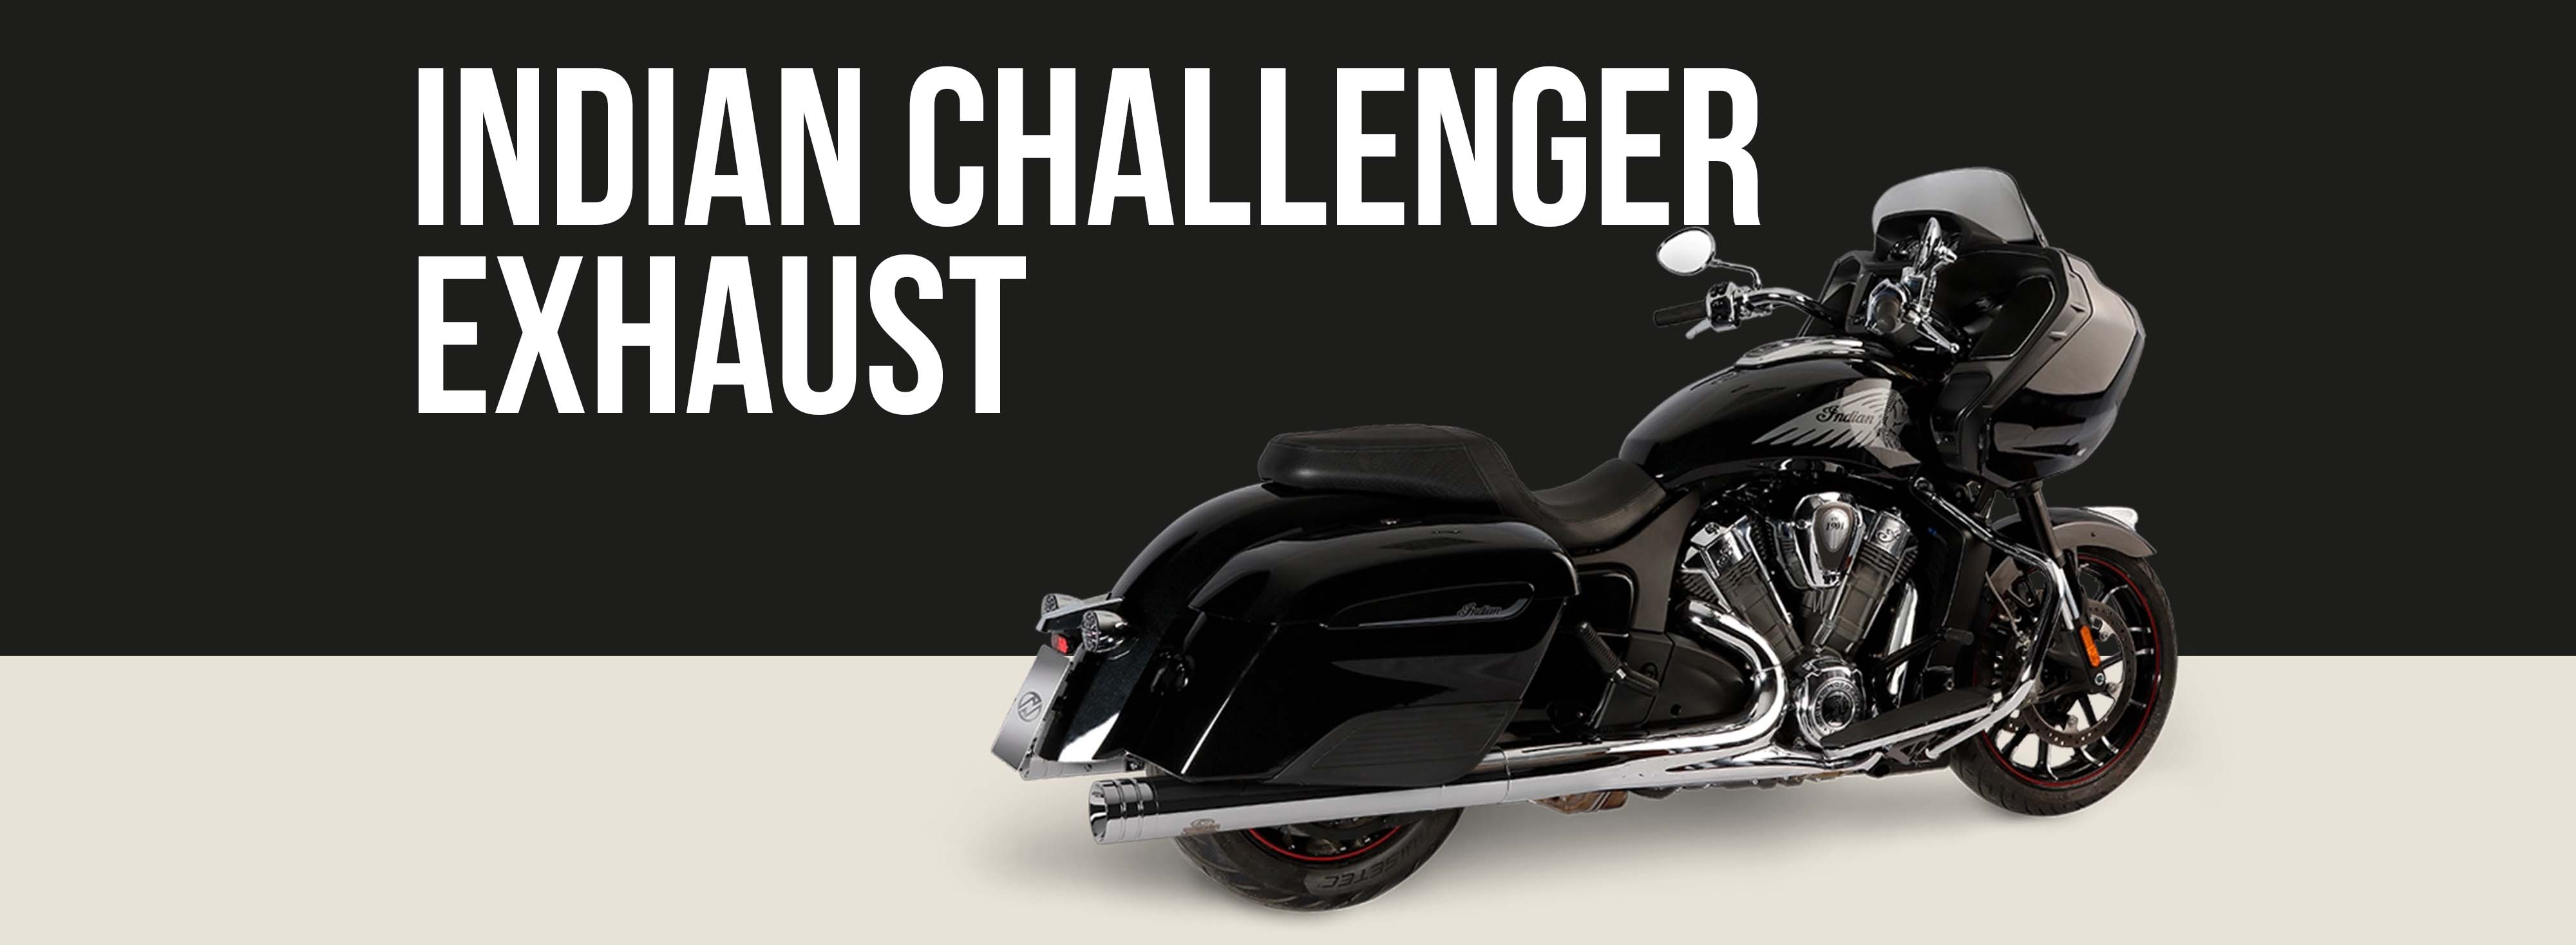 Indian Challenger Motorcycle Brand Page Header